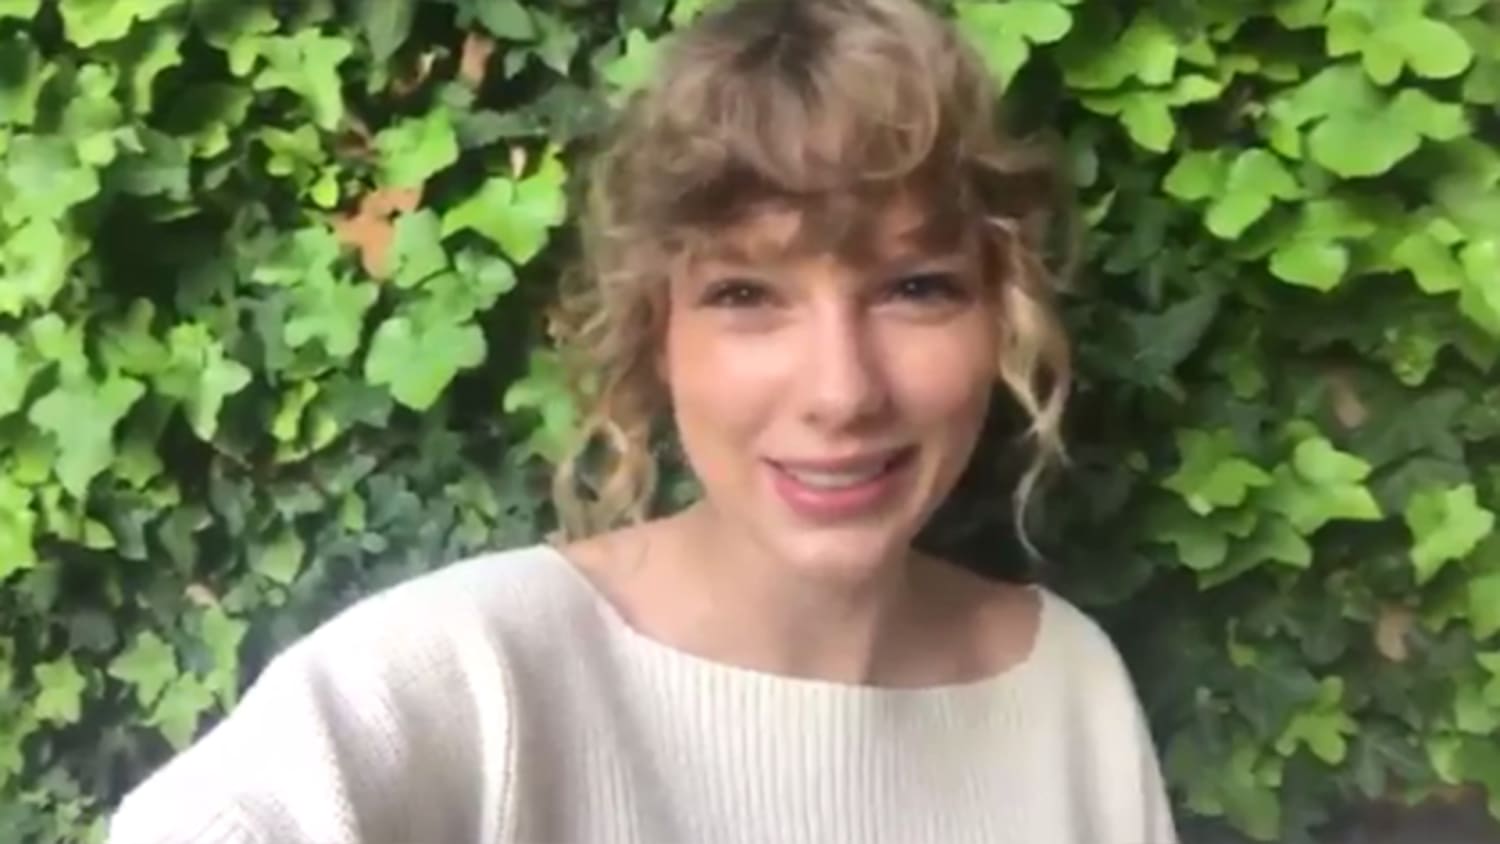 taylor swift with curly hair and bangs